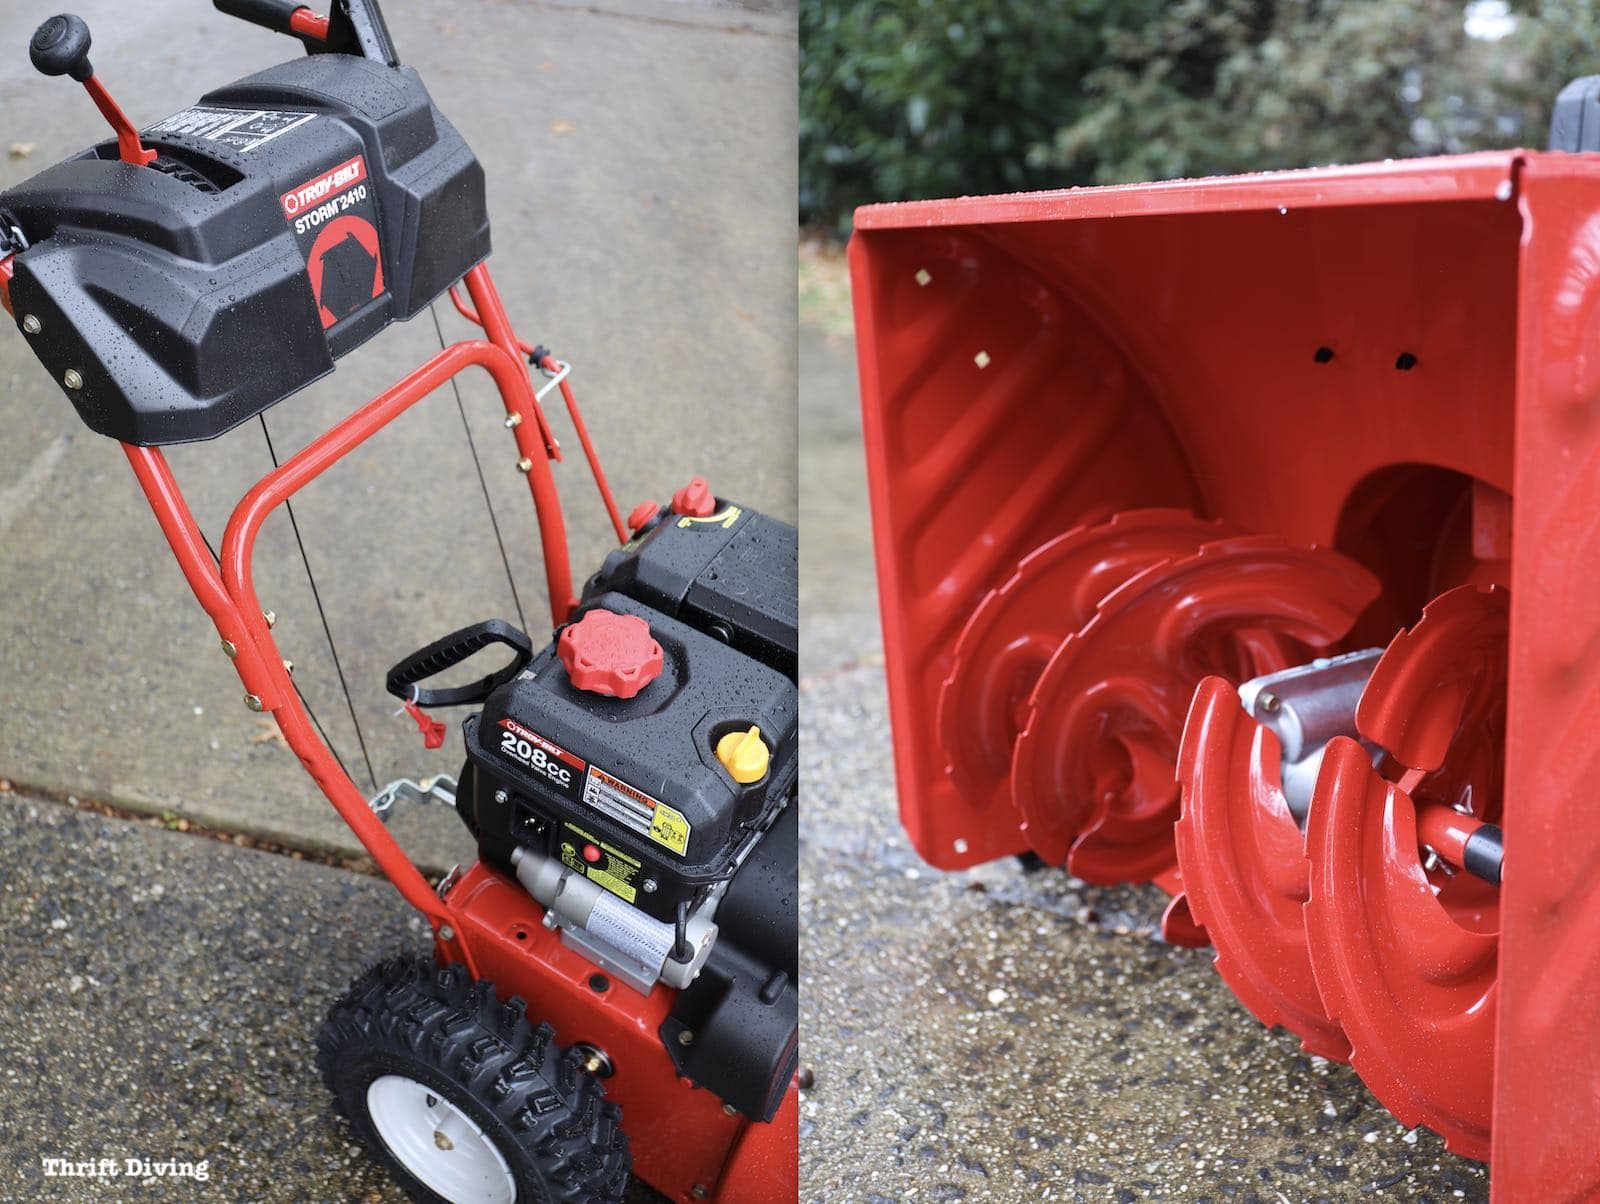 5 Questions You Must As Before Buying and Using a Snowblower - Speed gears on top of snowblower - Thrift Diving